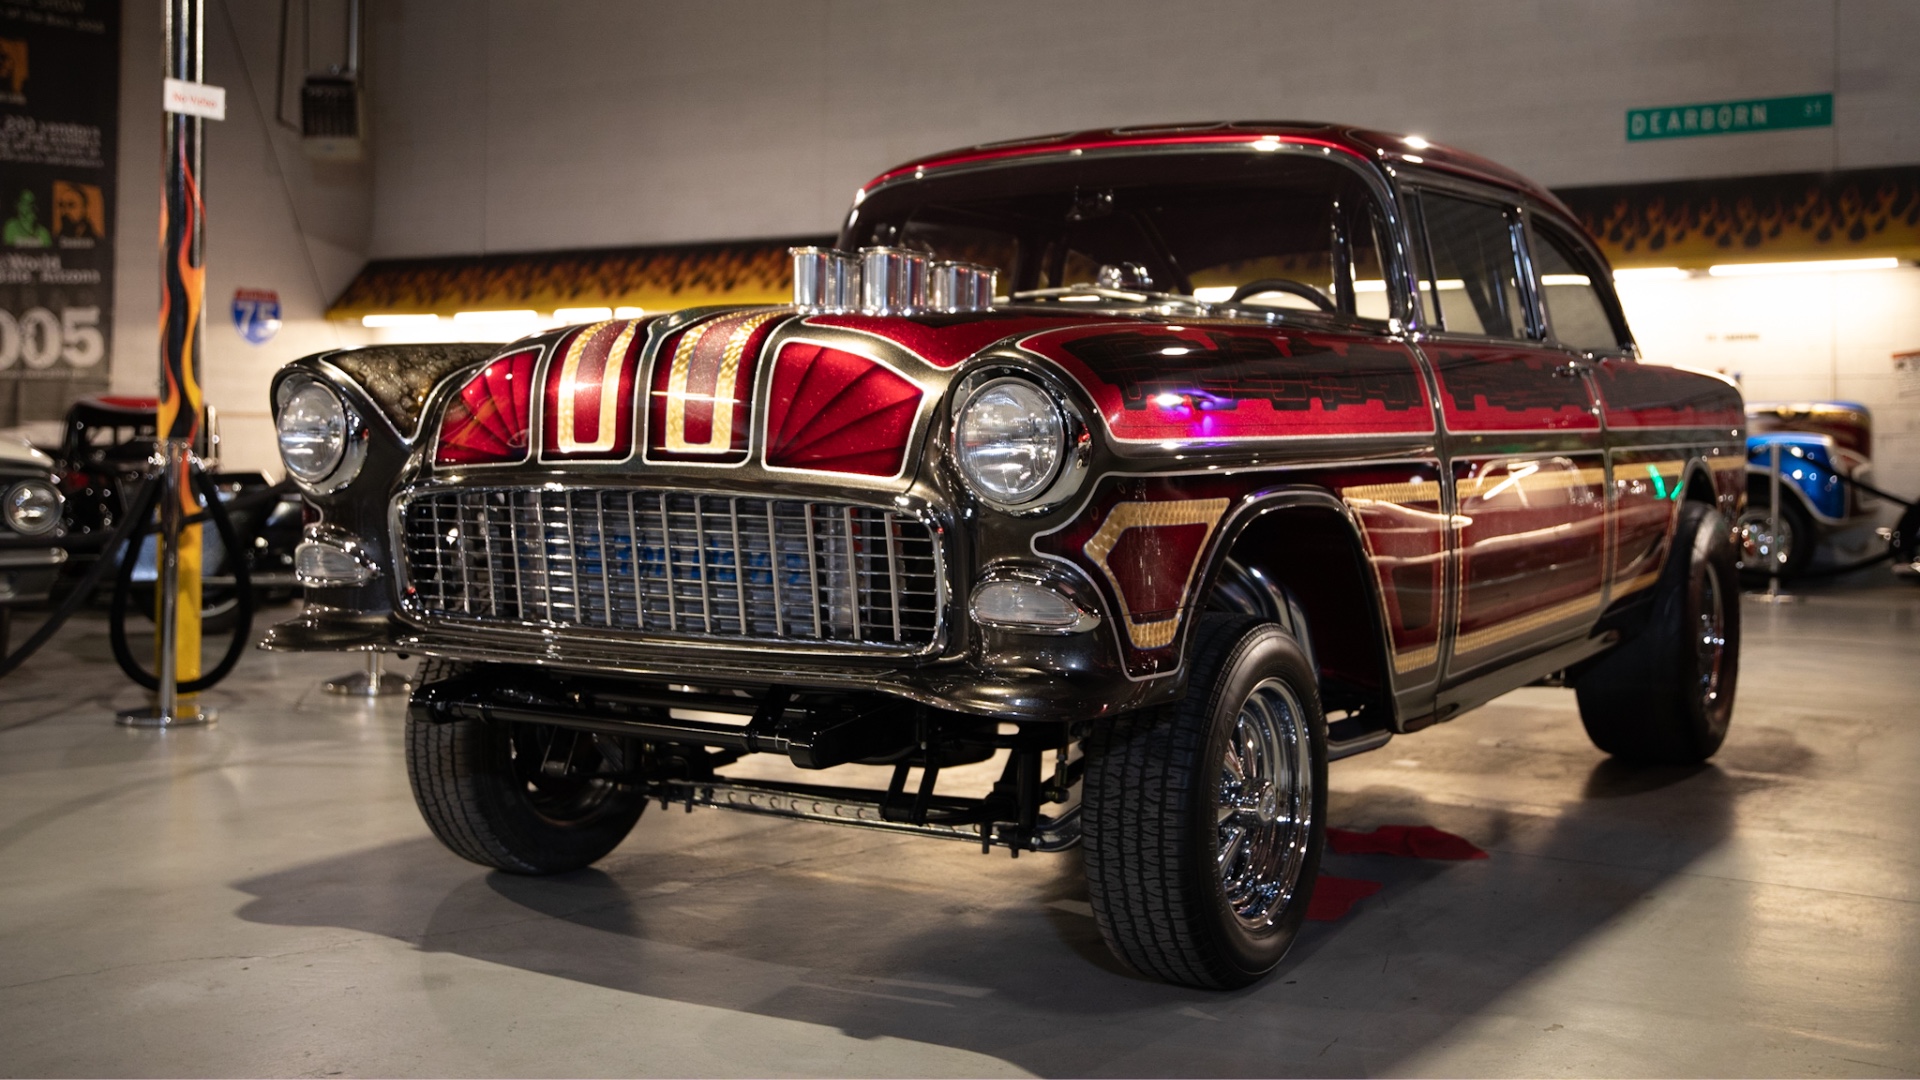 Counting Cars: Danny’s Eight “Cool Cars for Cool Cats”